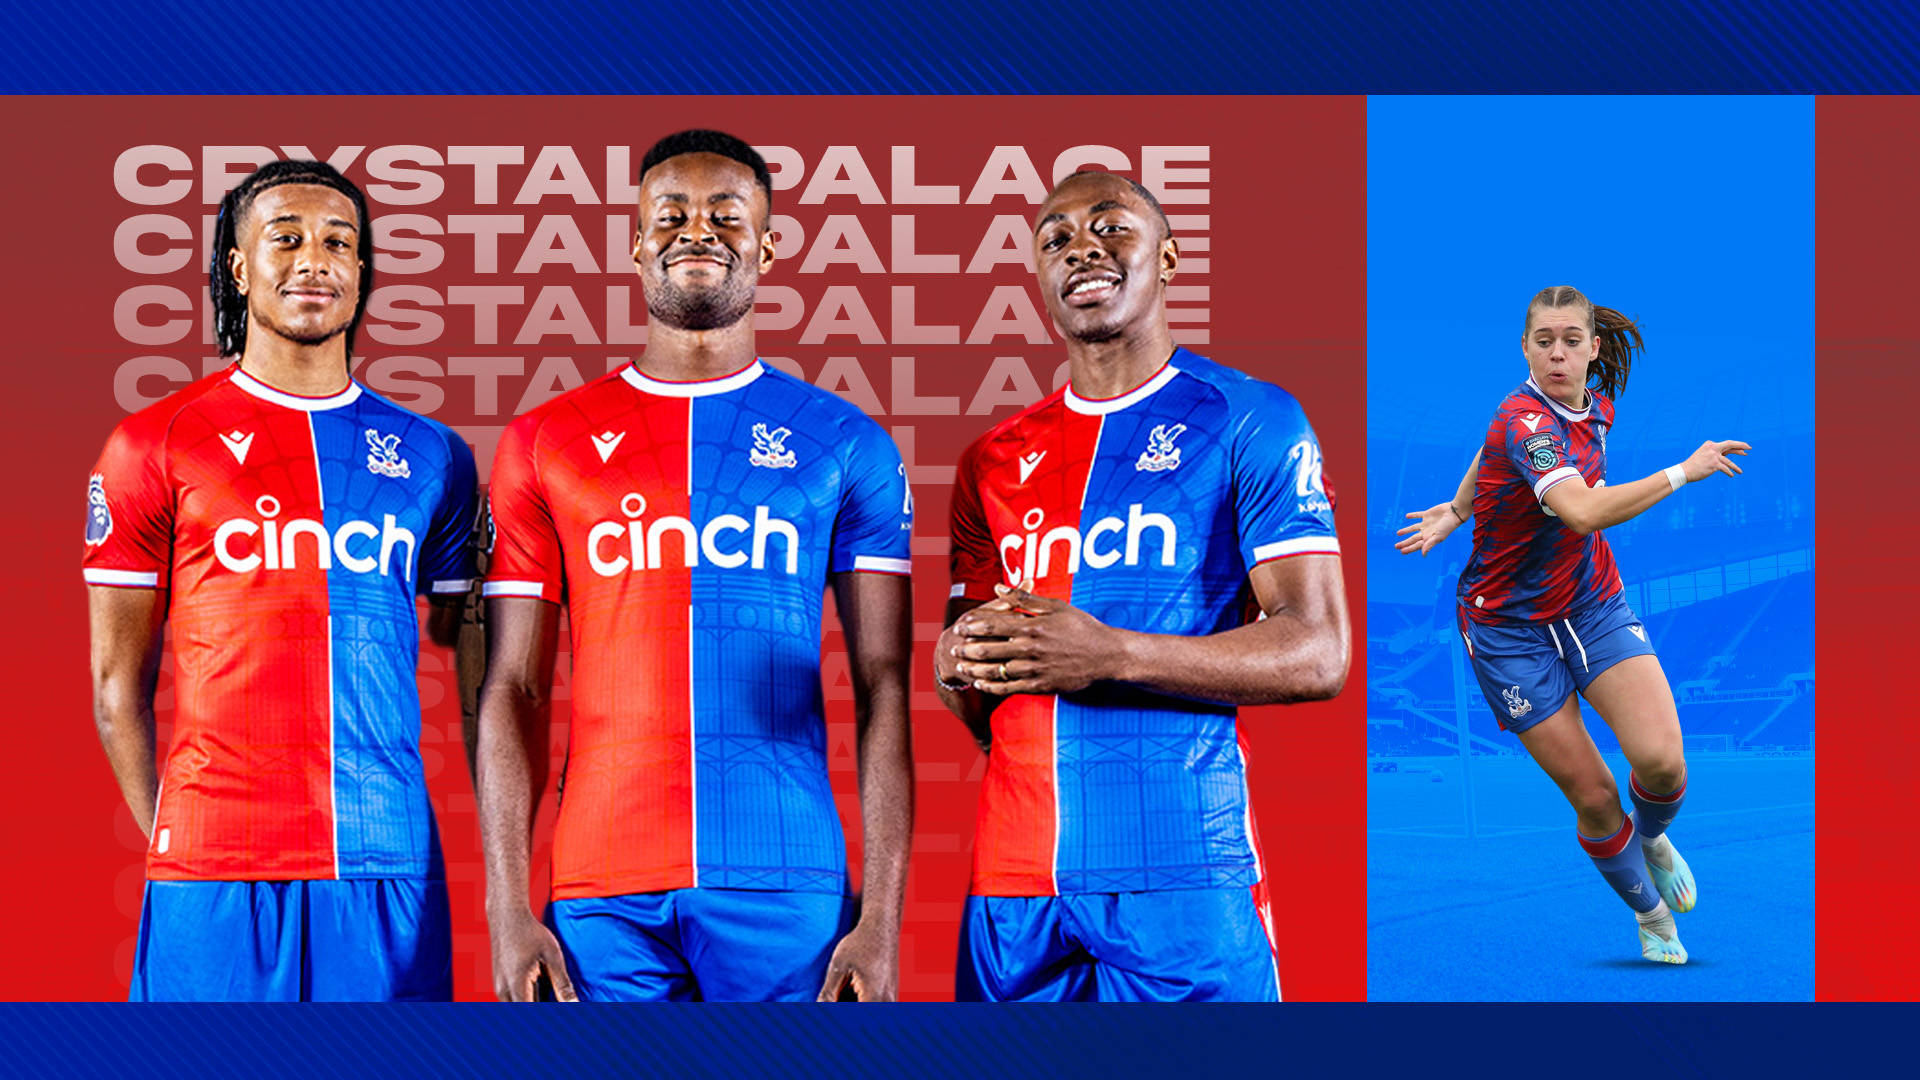 Crystal Palace name Cinch as main shirt sponsor in multi-year deal